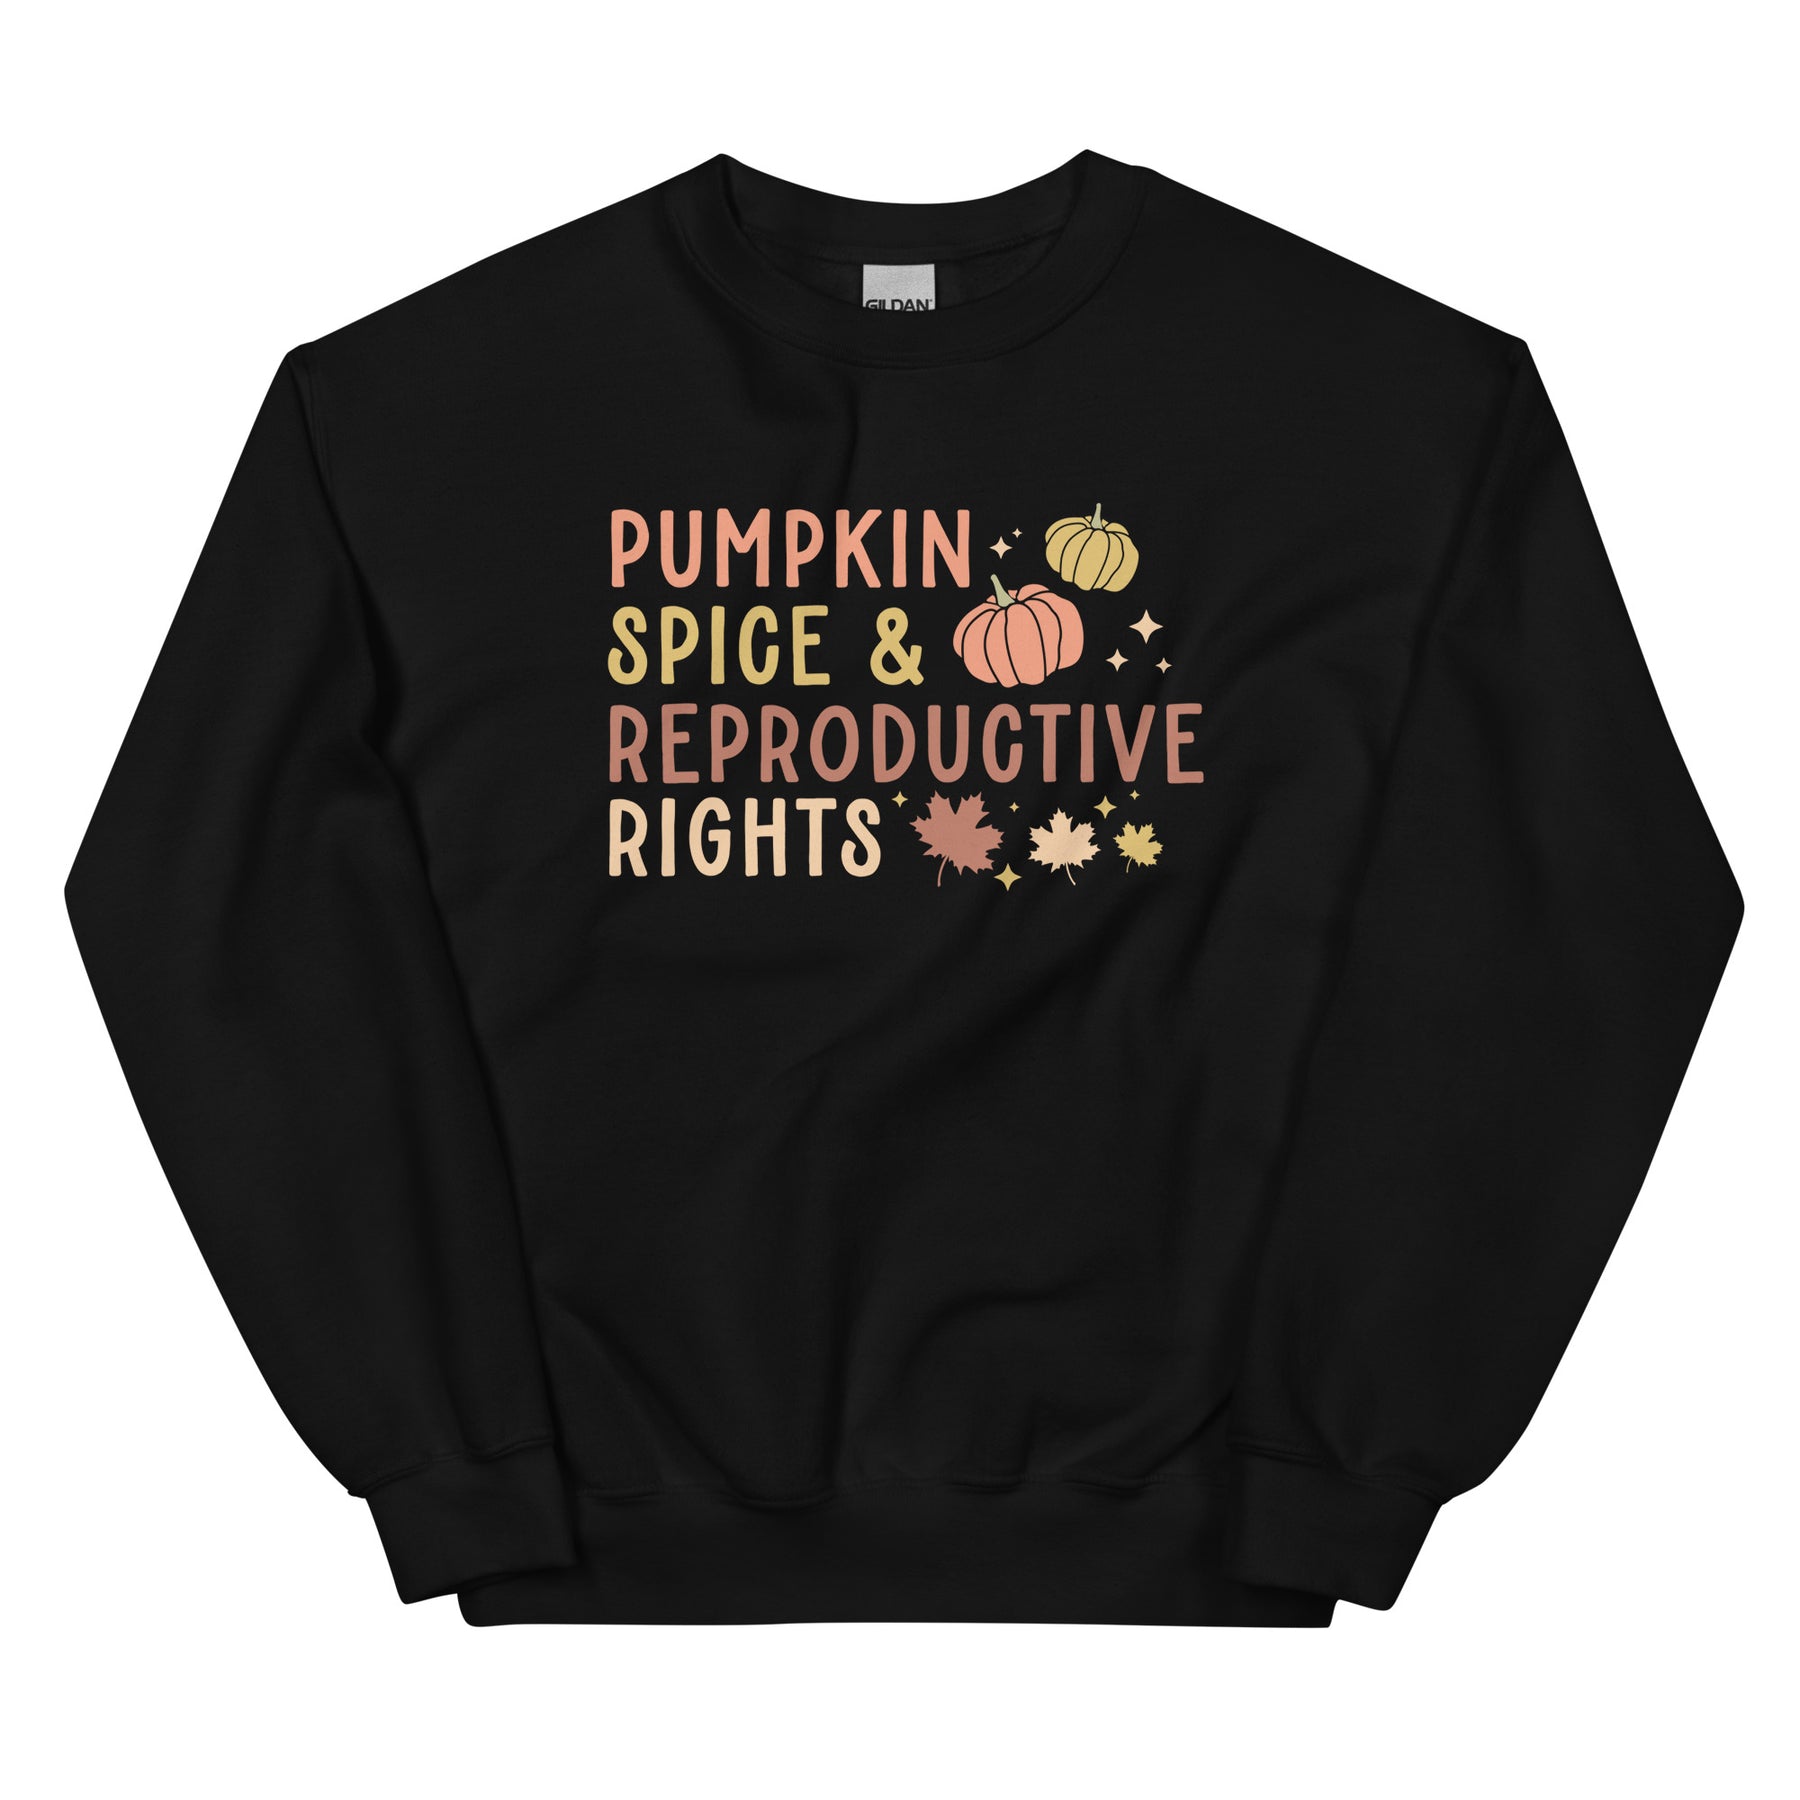 Pumpkin Spice and Reproductive Rights Sweatshirt